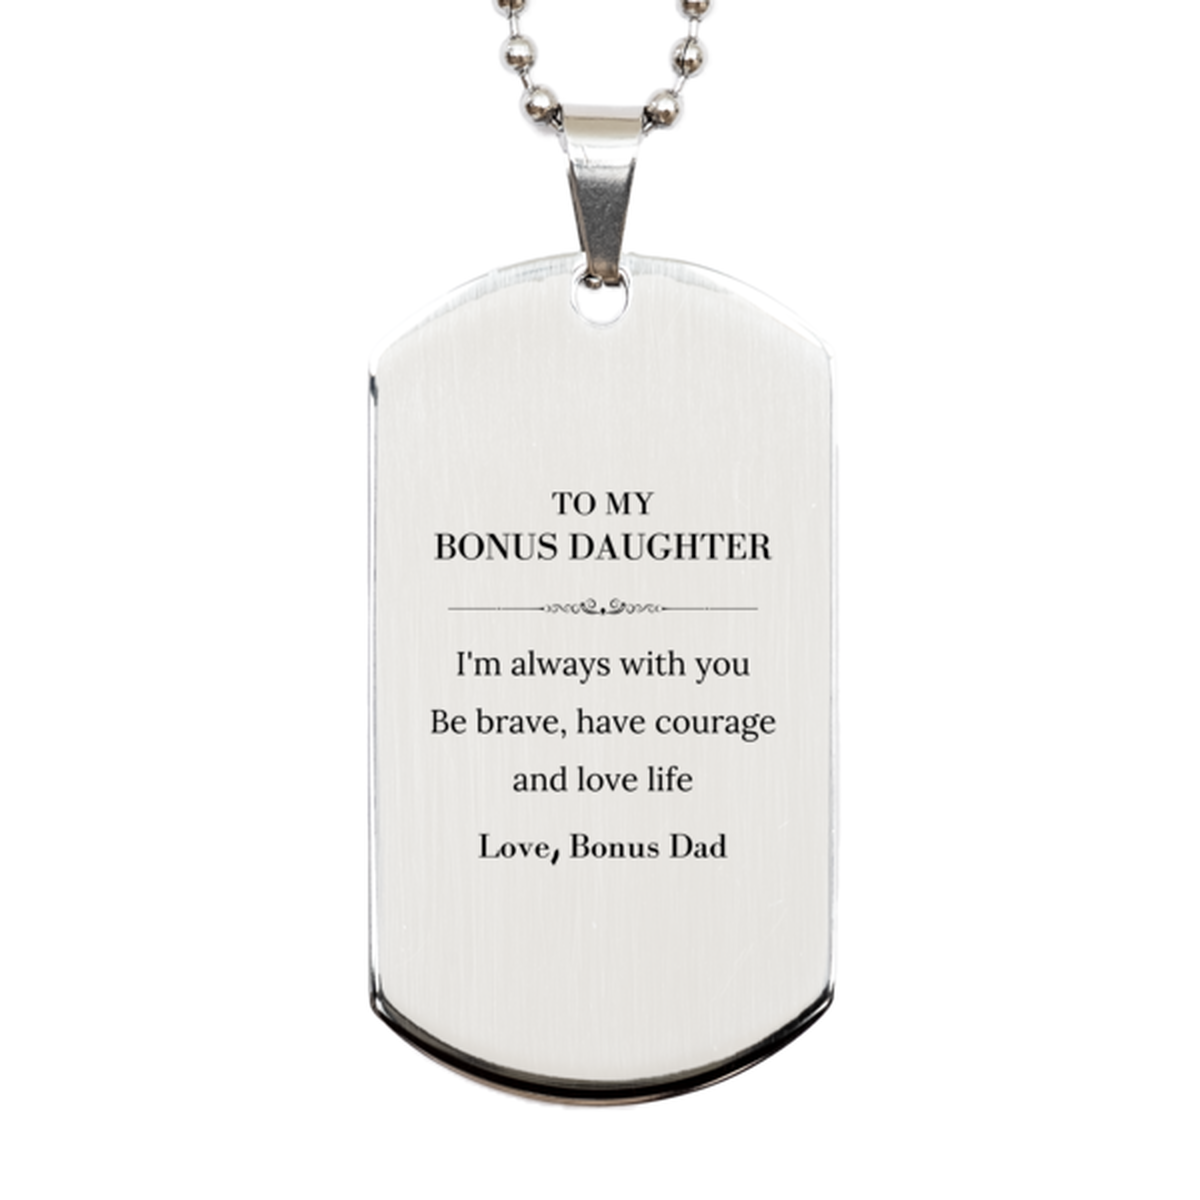 To My Bonus Daughter Gifts from Bonus Dad, Unique Silver Dog Tag Inspirational Christmas Birthday Graduation Gifts for Bonus Daughter I'm always with you. Be brave, have courage and love life. Love, Bonus Dad